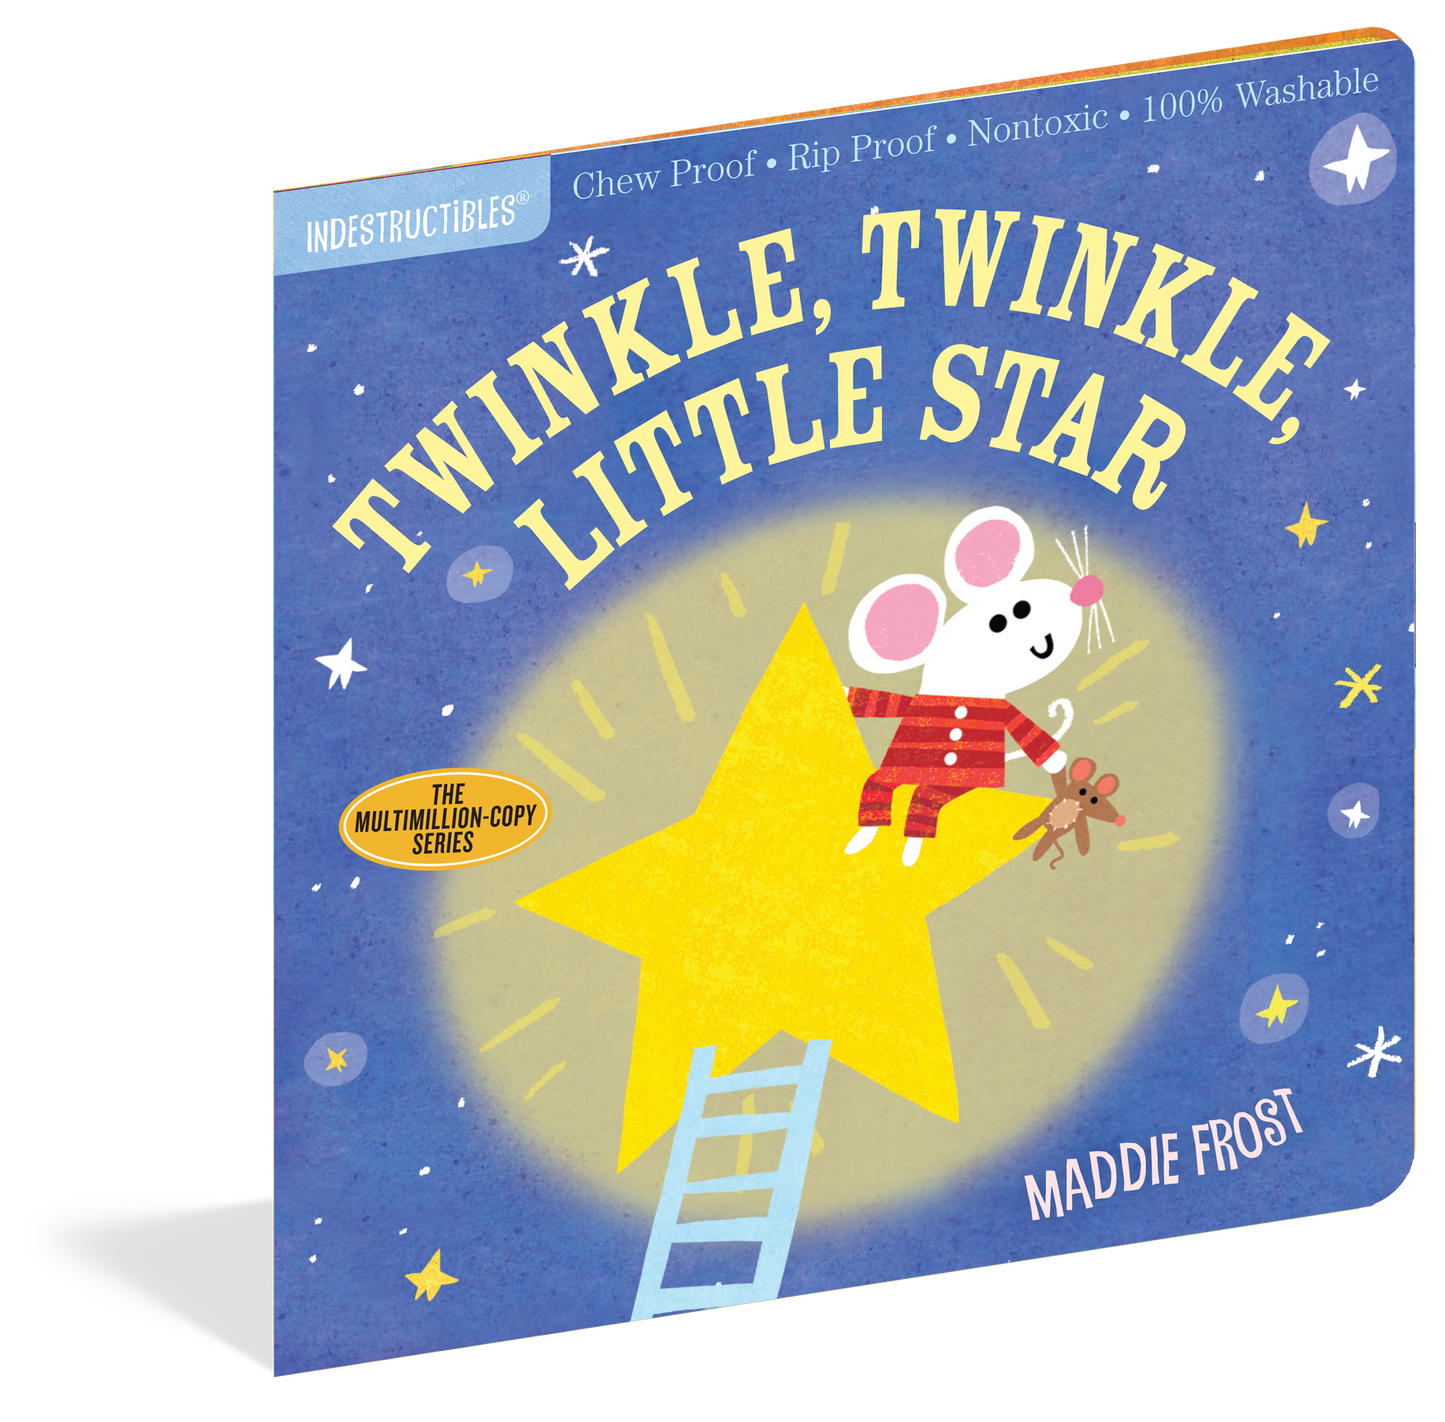 Indestructibles Books - Twinkle, Twinkle, Little Star